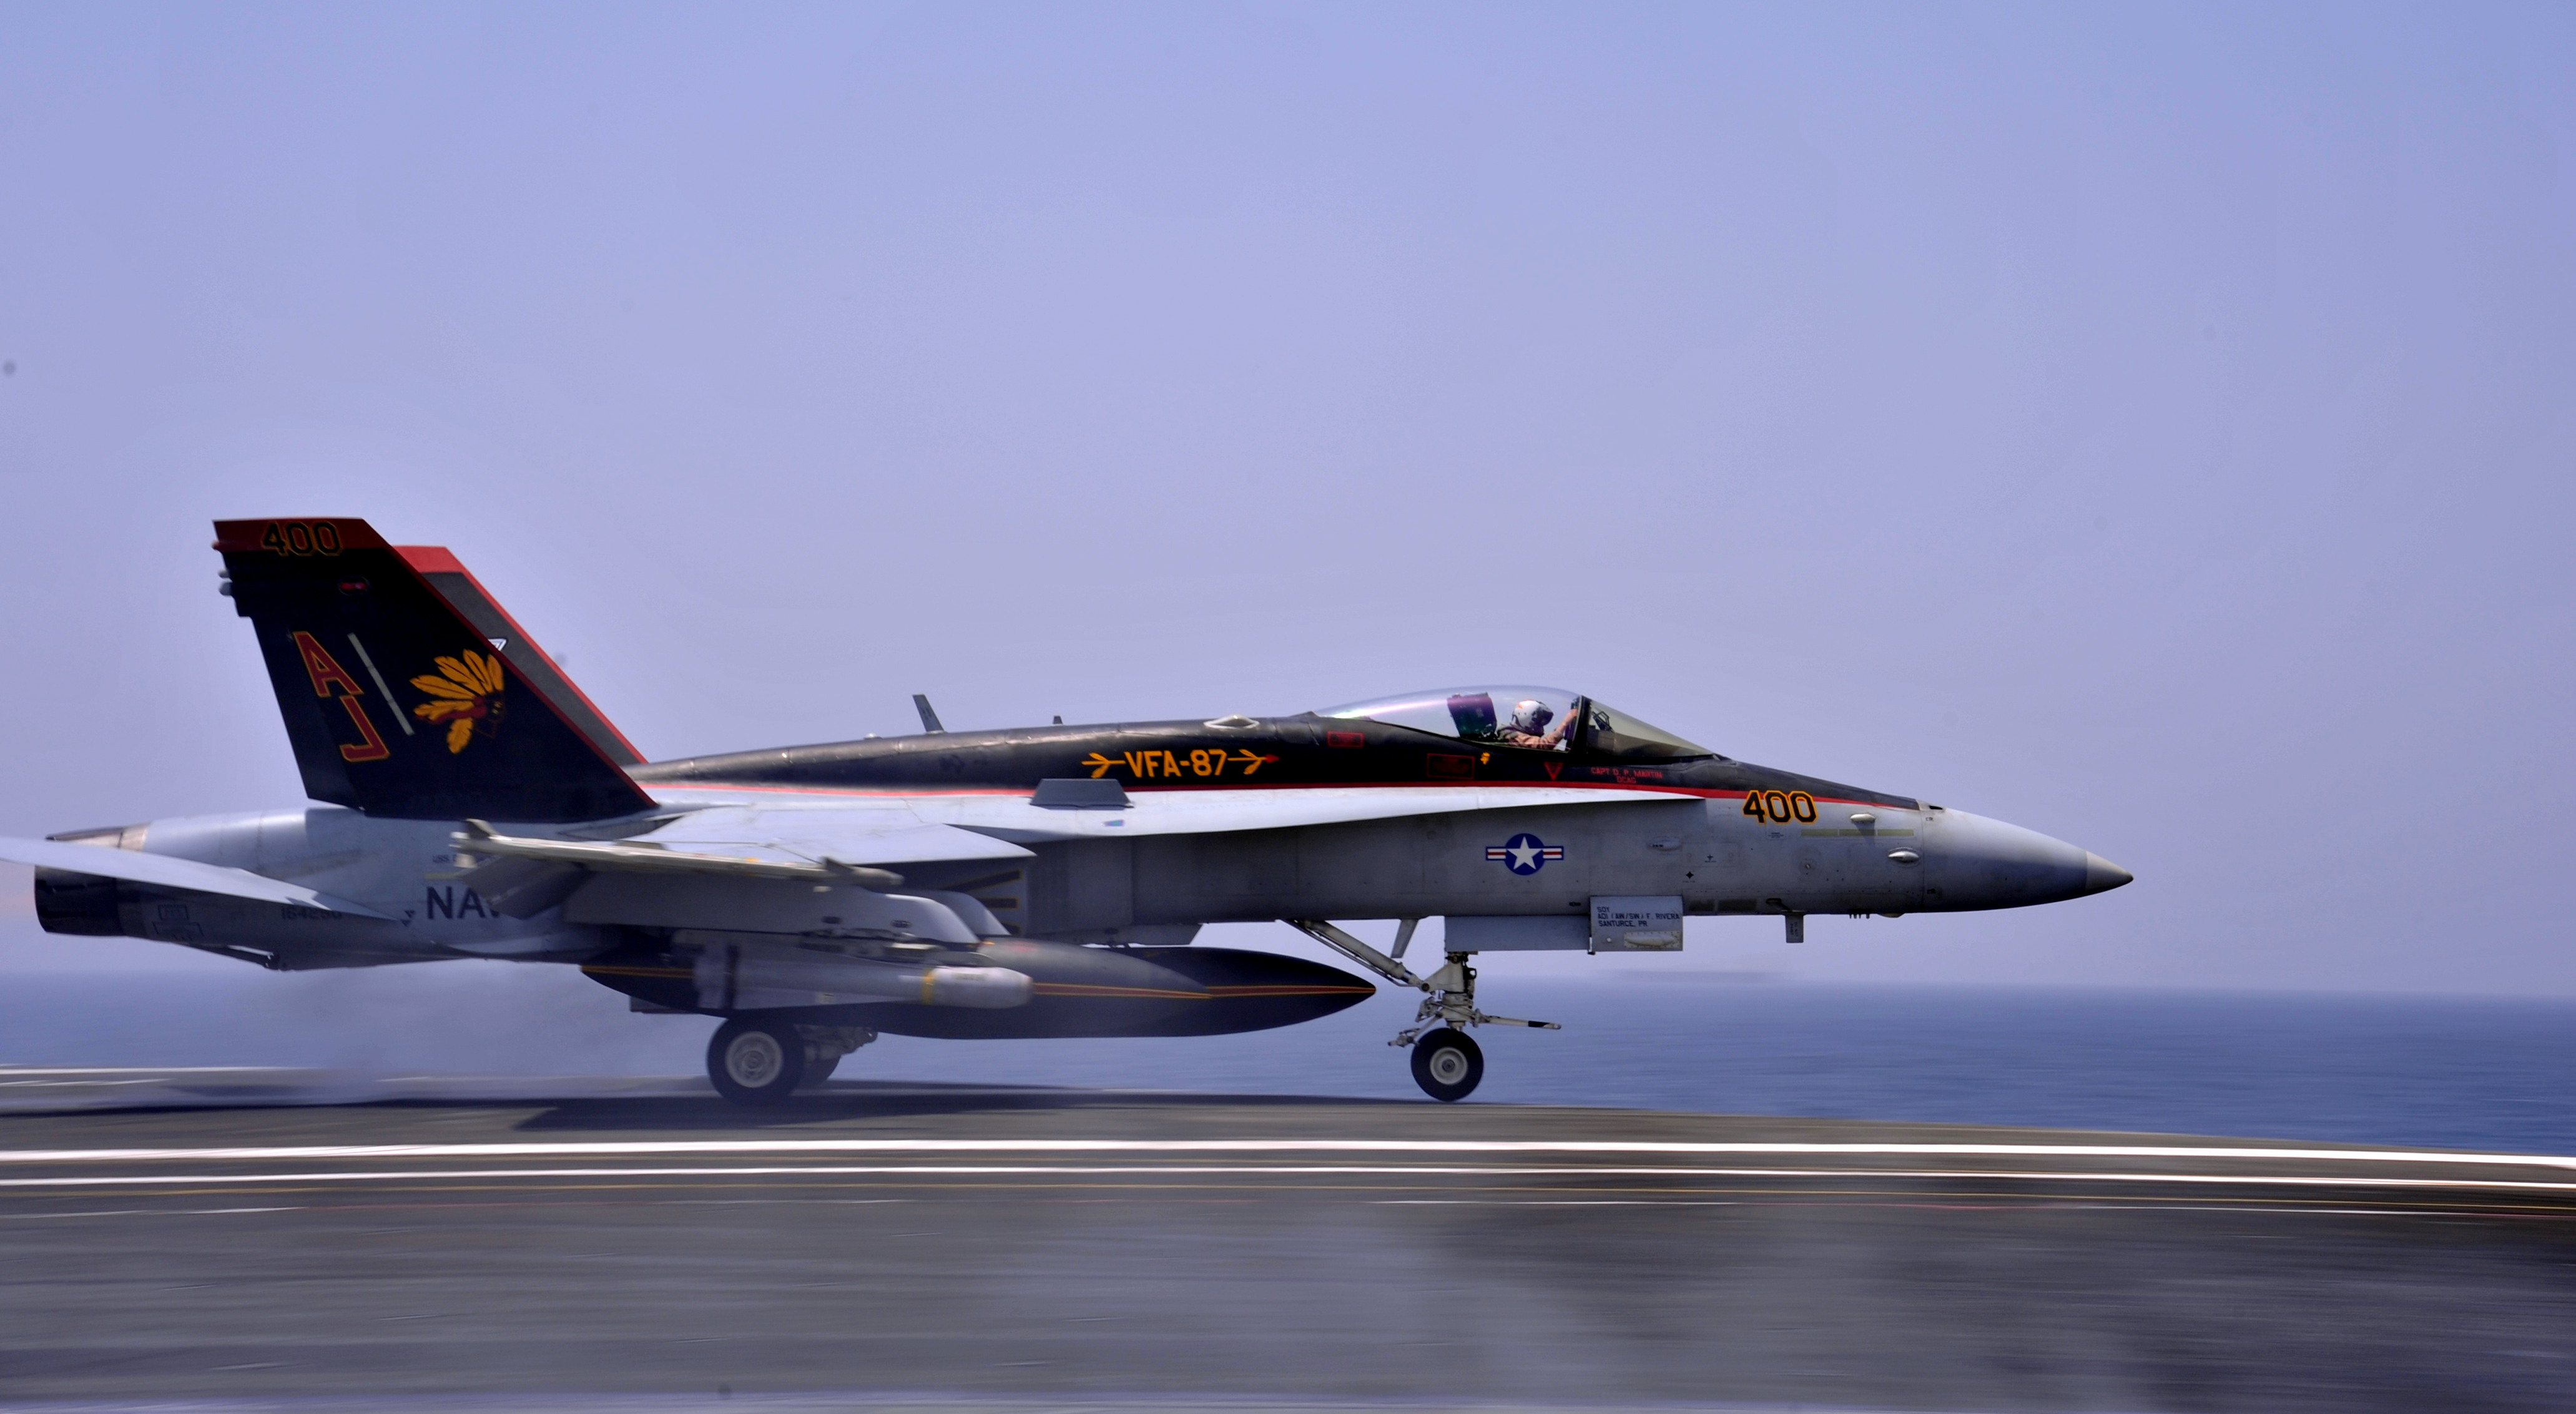 F/A-18C Hornet assigned to the Golden Warriors of Strike Fighter Squadron (VFA) 87 takes off from the flight deck of the aircraft carrier USS George H.W. Bush (CVN-77) in the Persian Gulf on Aug. 10, 2014. US Navy Photo